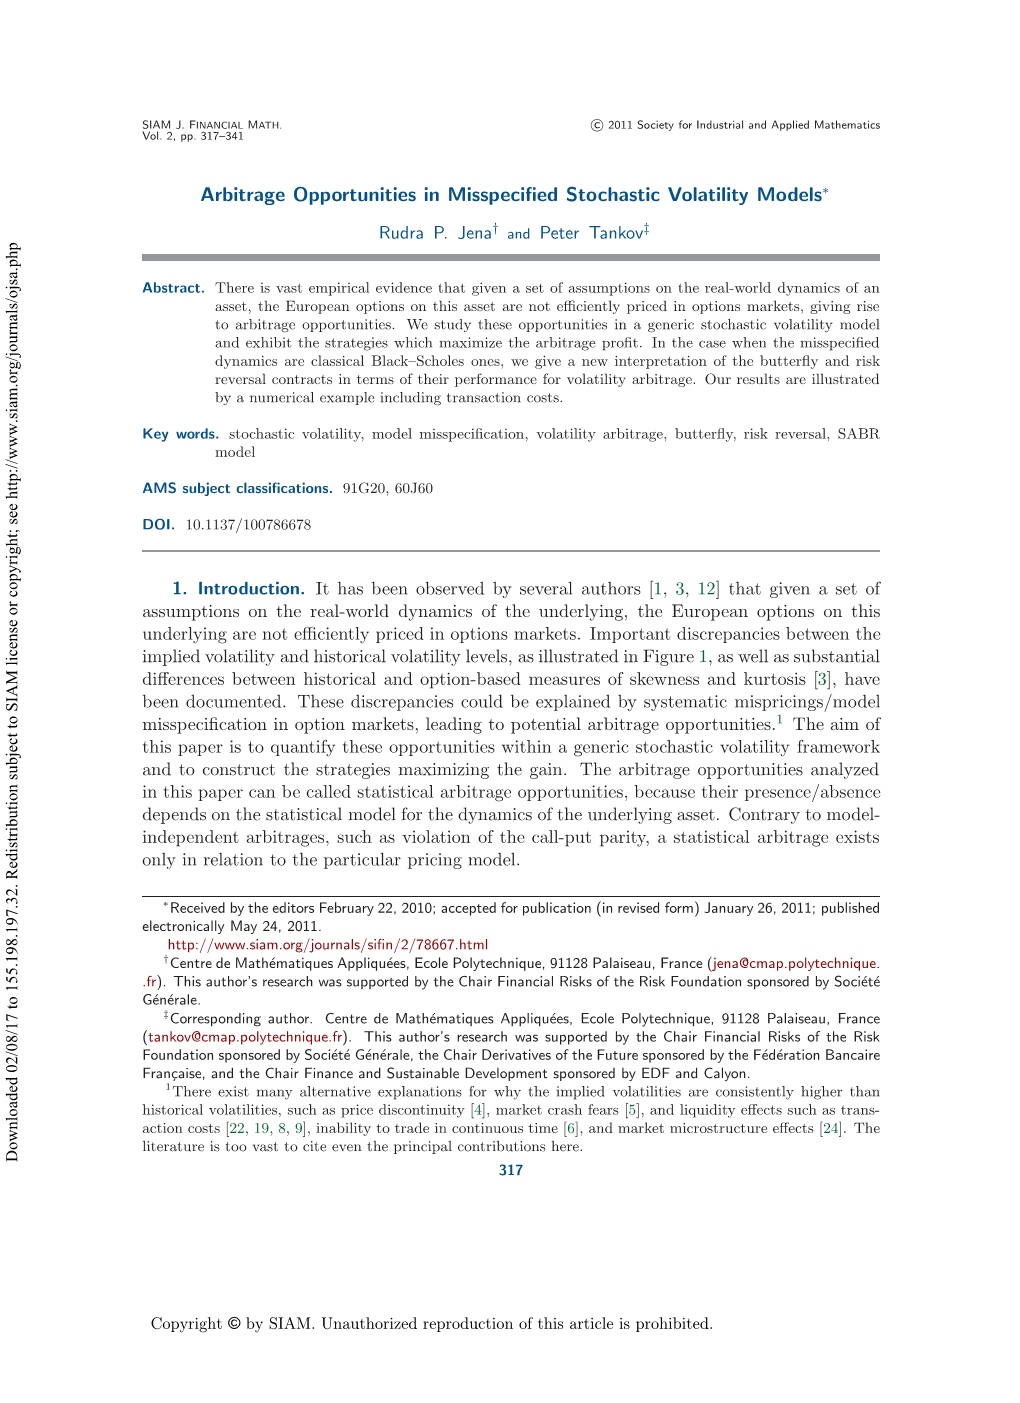 Arbitrage Opportunities in Misspecified Stochastic Volatility Models | SIAM Journal on Financial Mathematics | Vol. 2, No. 1